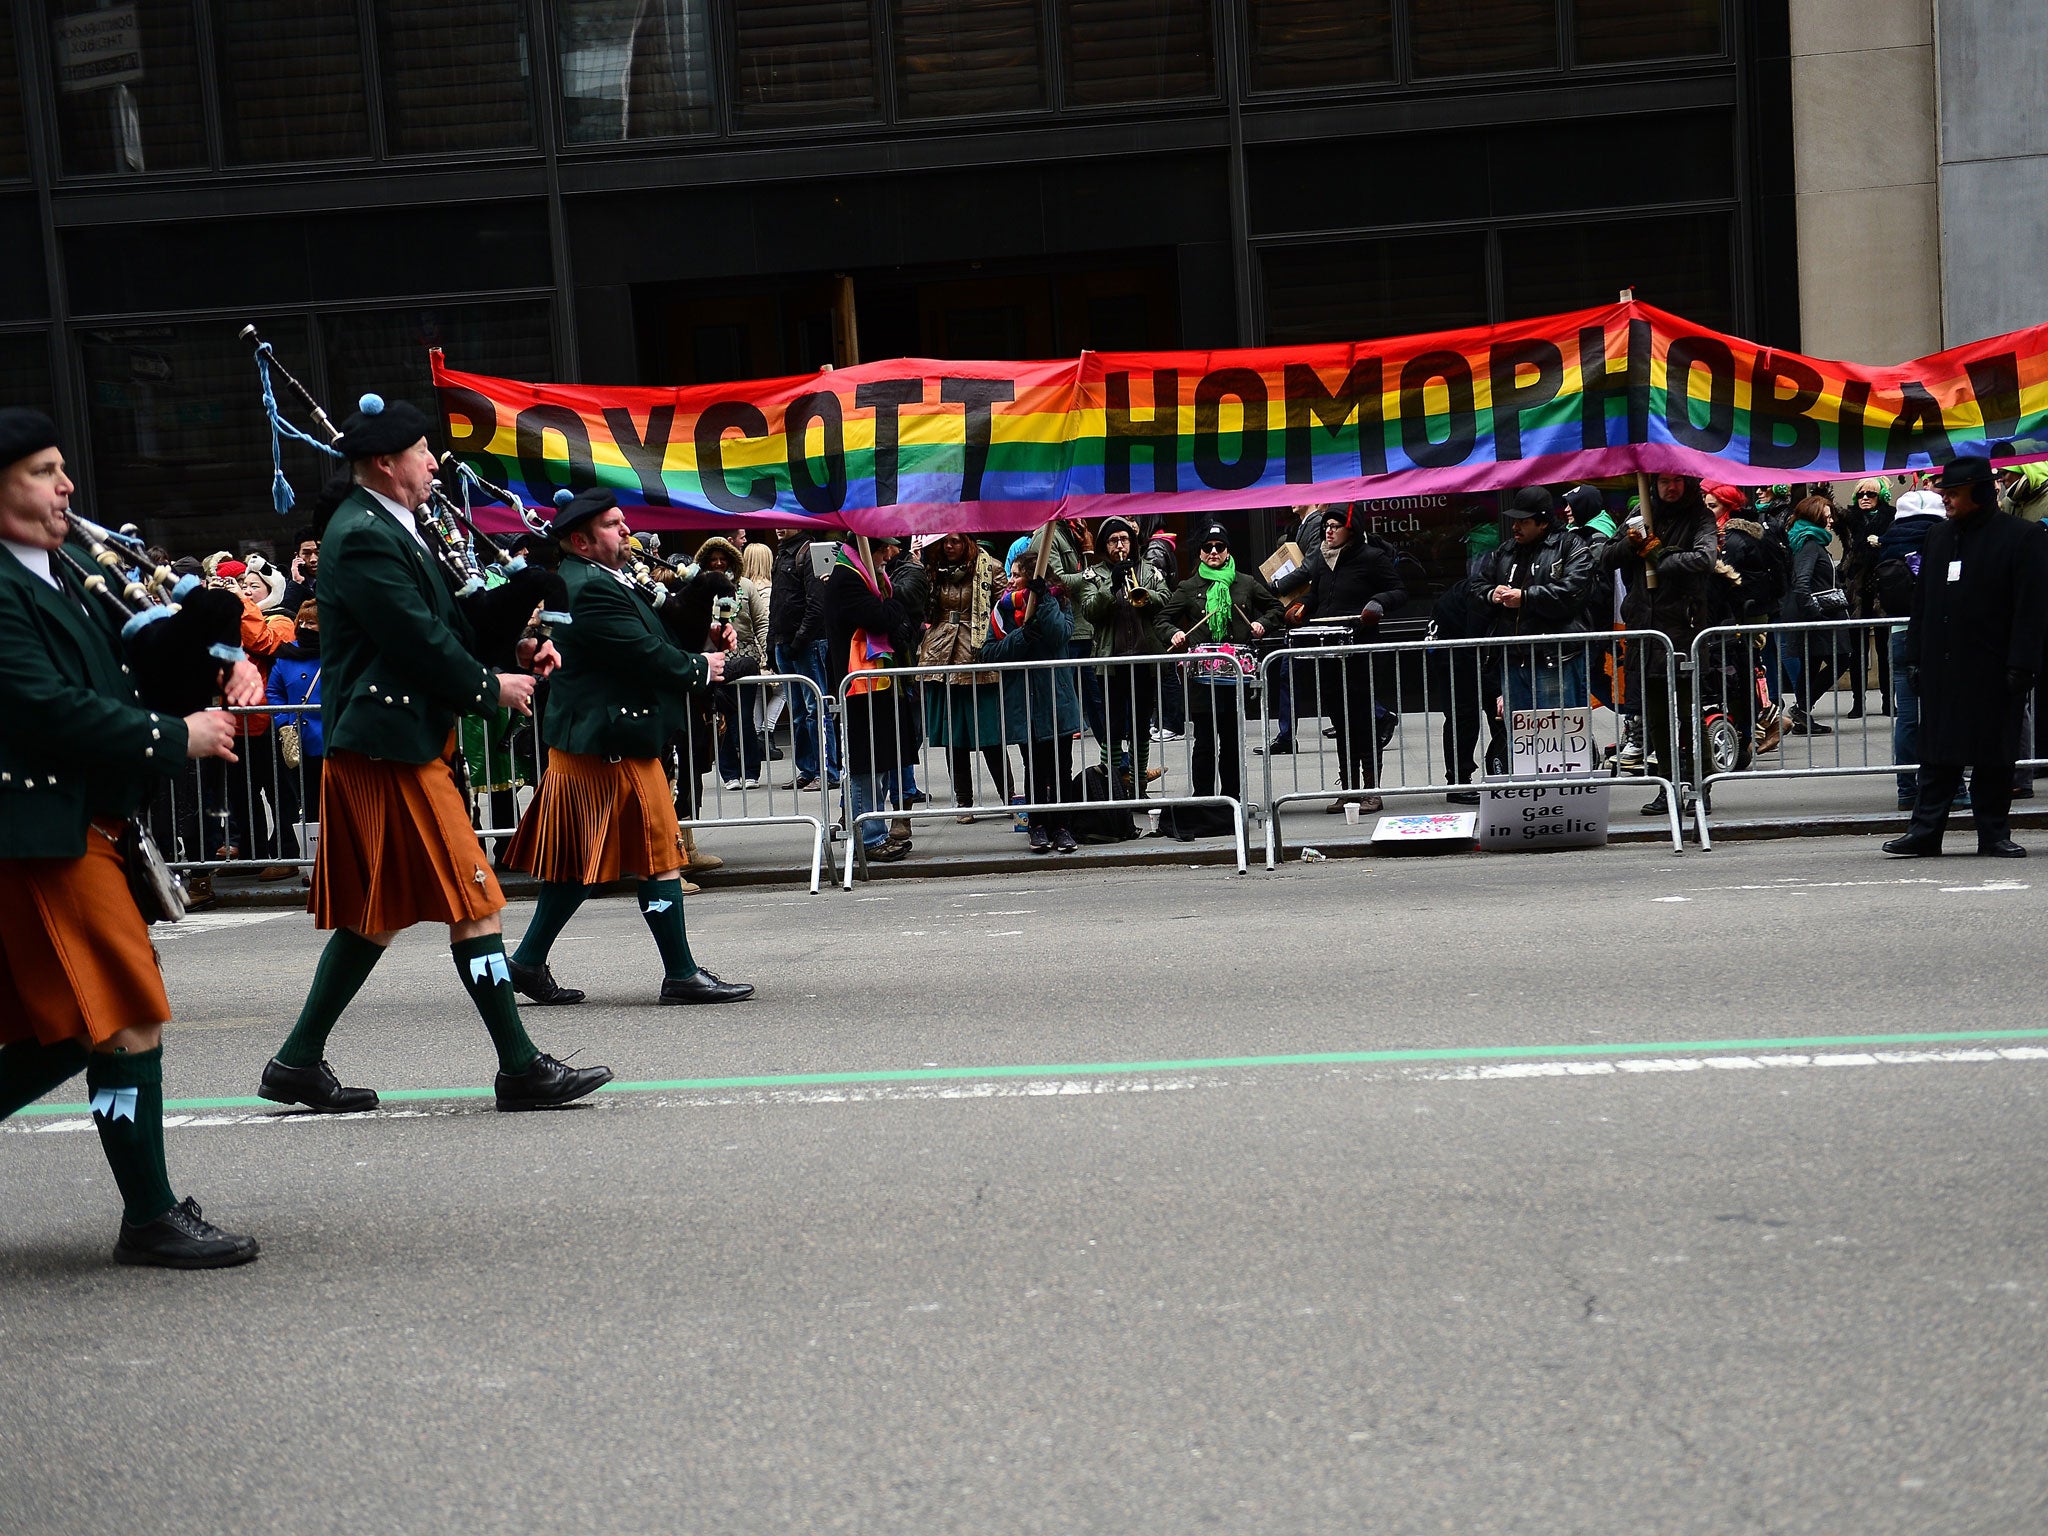 LGBT rights supporters protest against the exclusion of their community community from the St. Patrick's Day parade during the annual event in New York in March last year